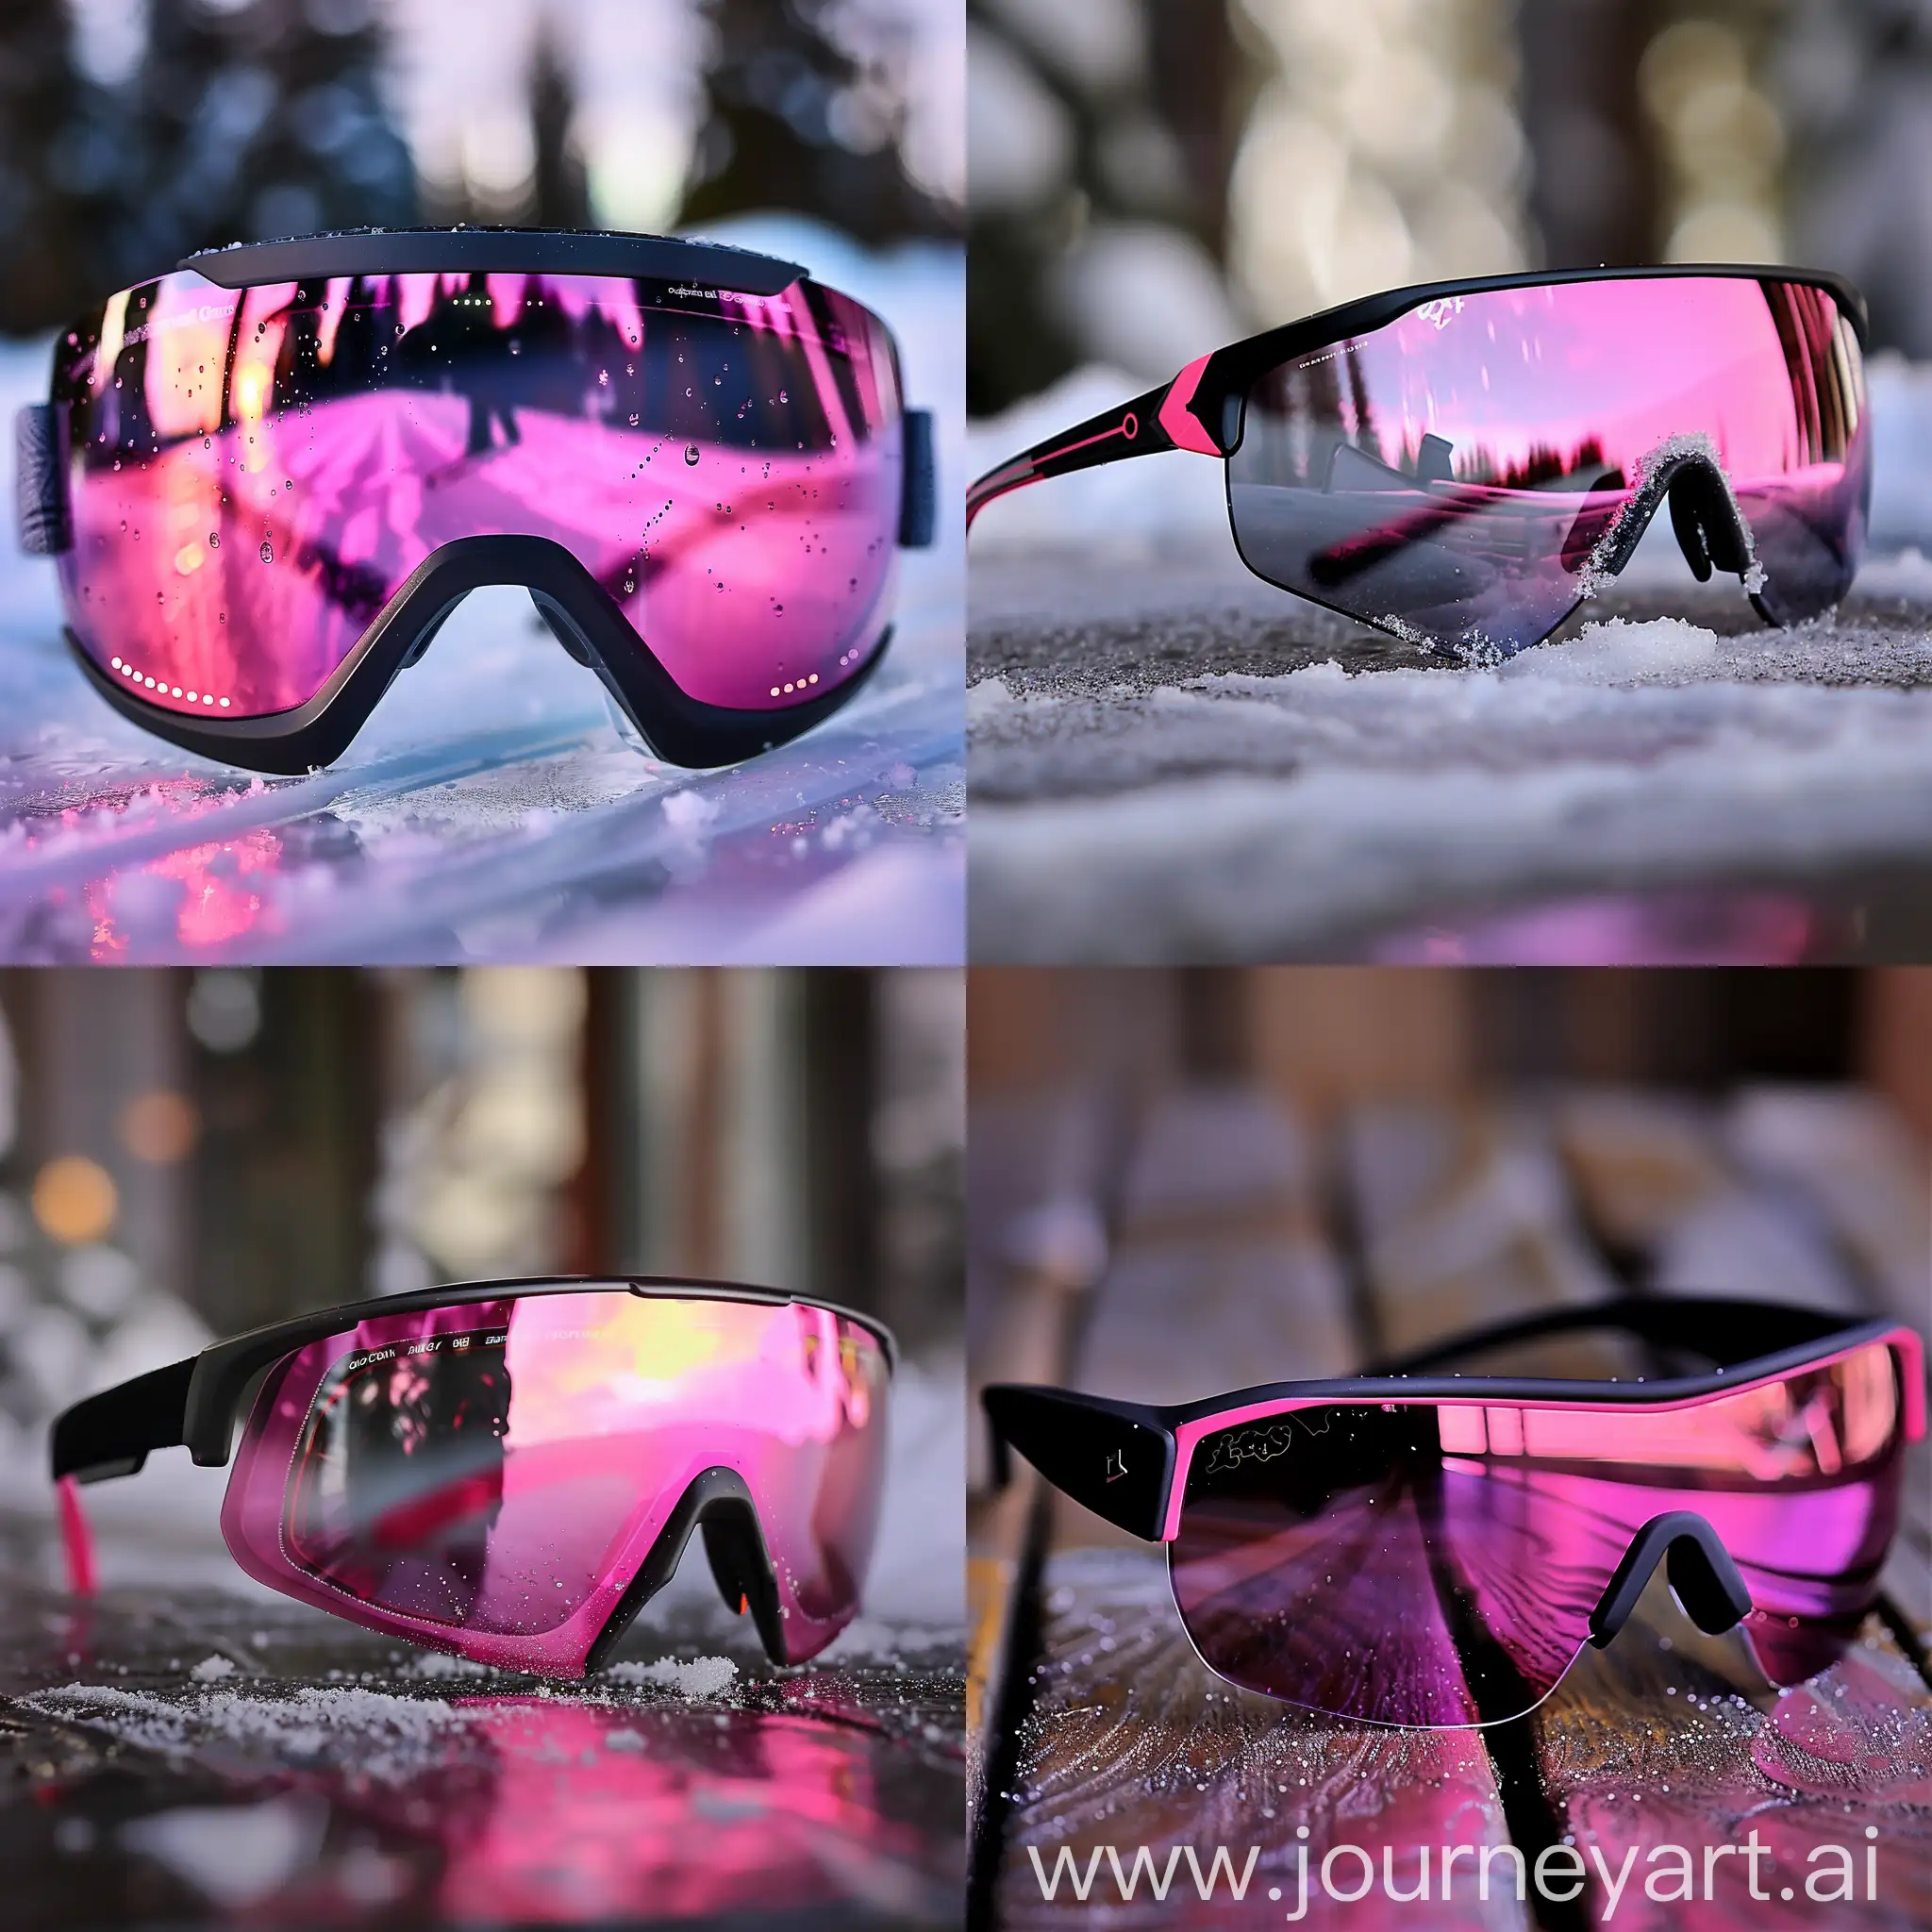 Cool, pink, trendy sports glasses that can be used to go skiing, jogging, fishing etc. The glass is black with a hint of pink in it.